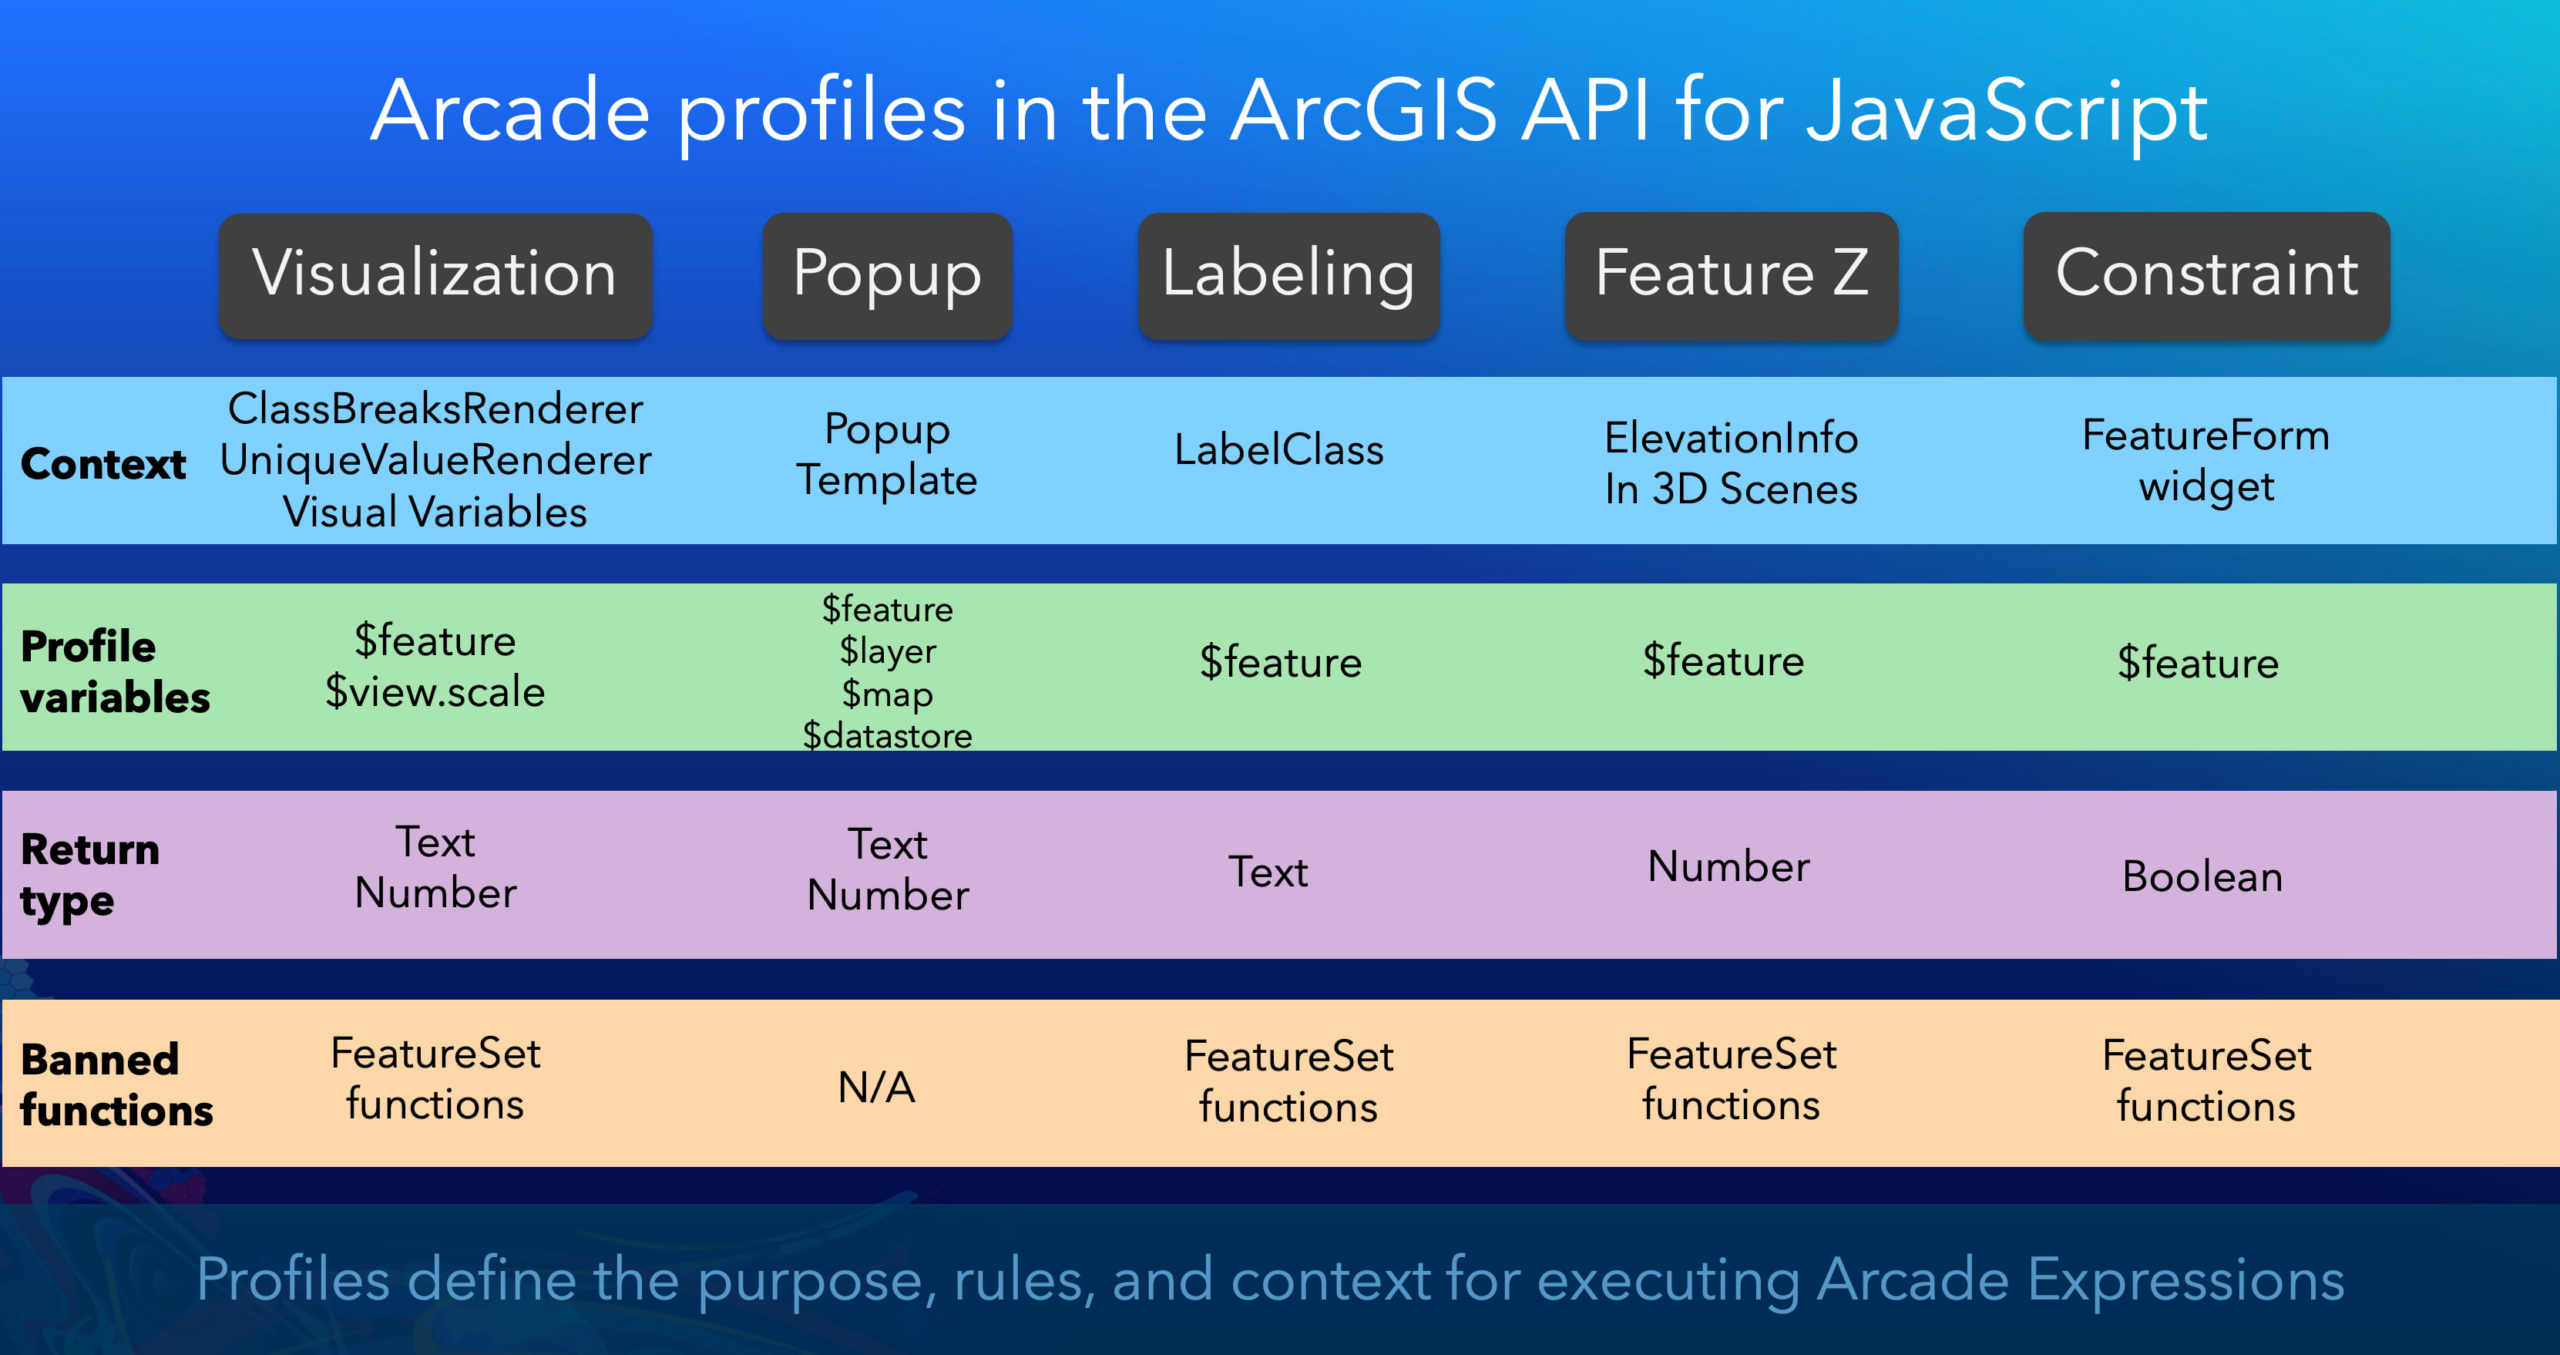 Arcade profiles supported by the ArcGIS API for JavaScript. Profiles define the context, variables, valid return types, and functions that may be used in expressions.